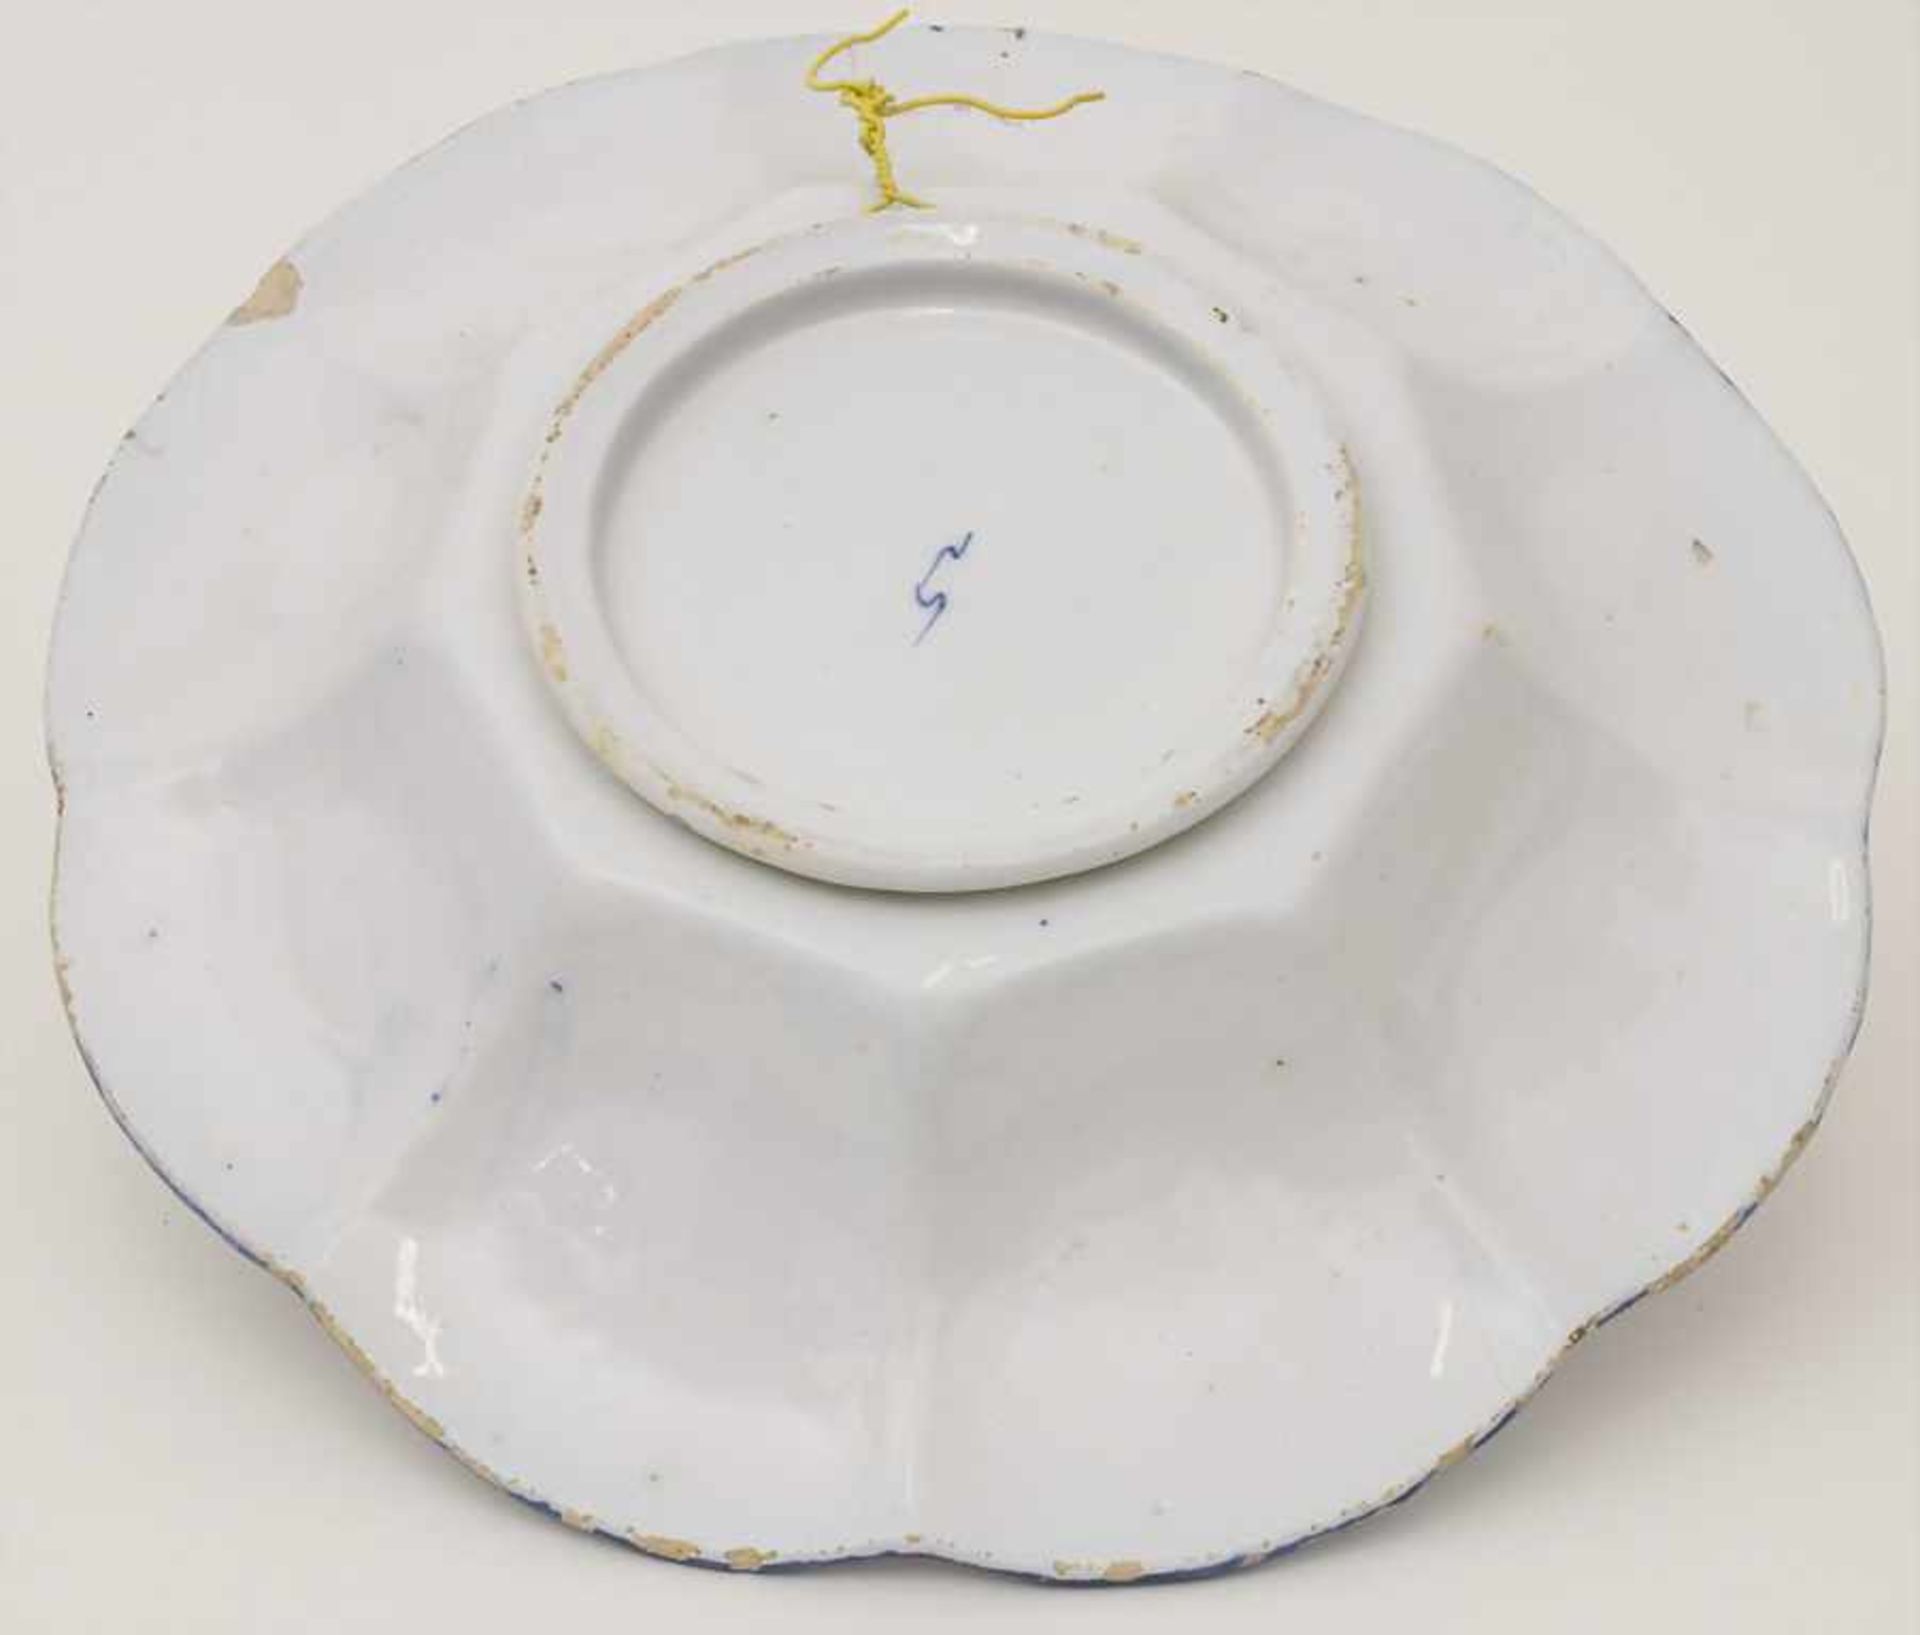 Fayence-Buckelschale mit Chinoiserien / A faience bowl with chinoiseries, wohl Hanau, 18. Jh. - Image 3 of 6